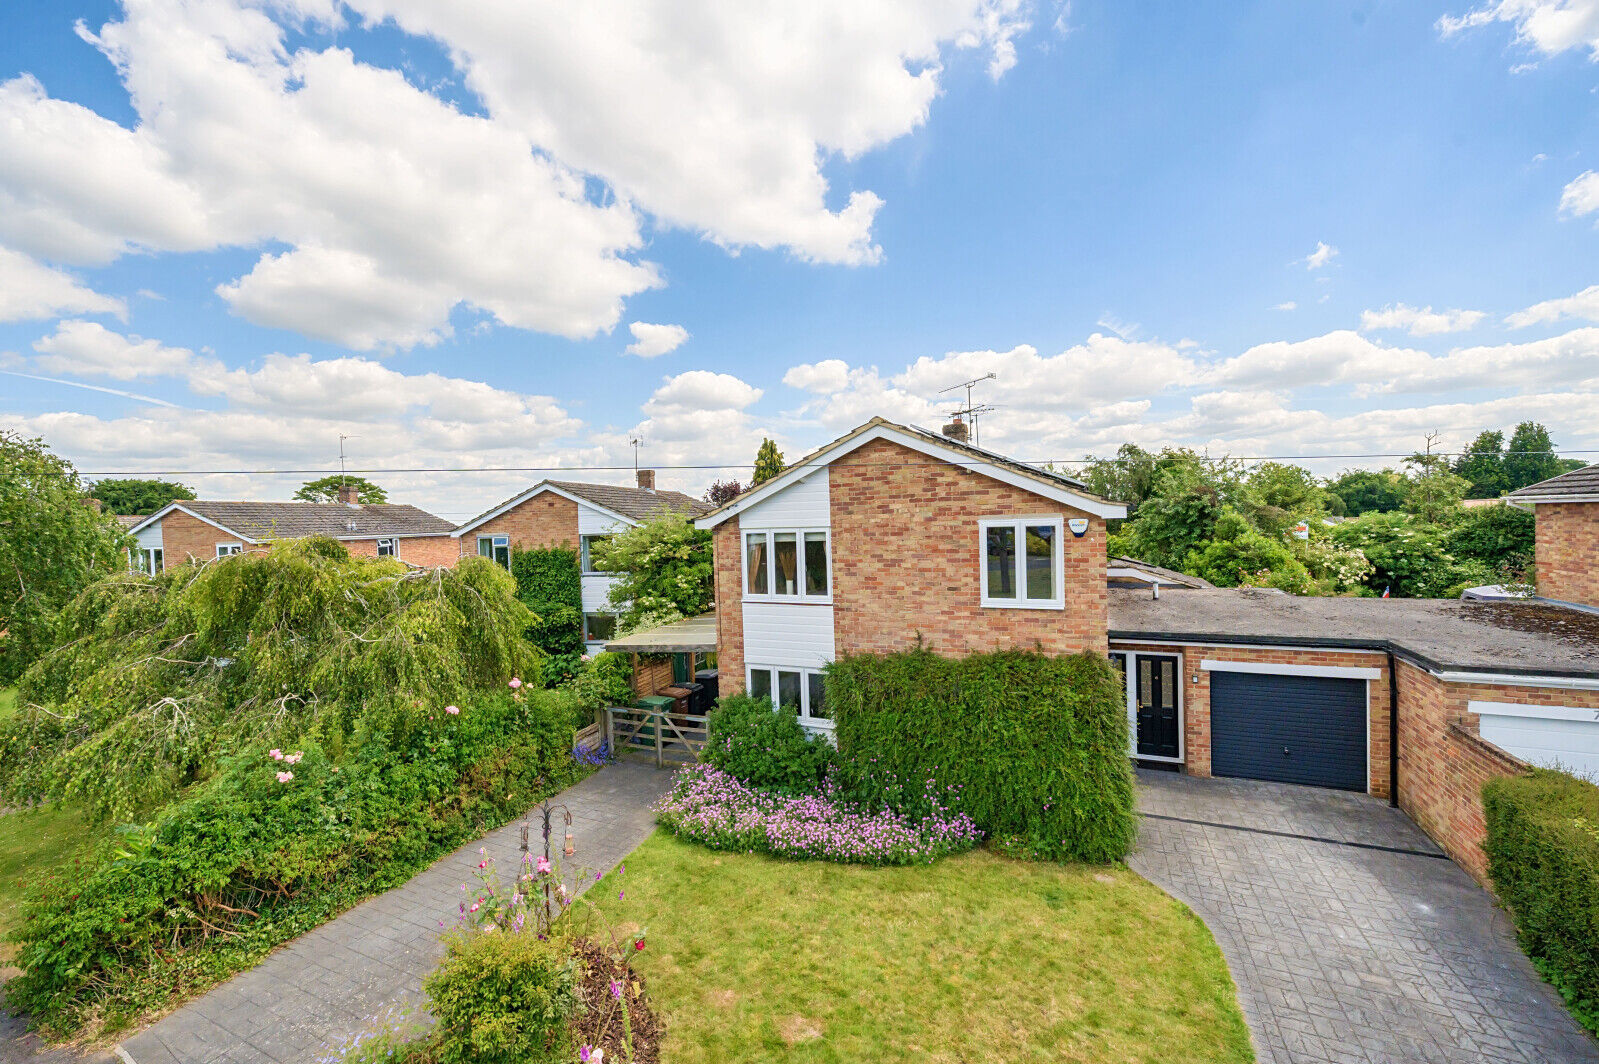 4 bedroom detached house for sale Hill Bottom Close, Whitchurch Hill, RG8, main image